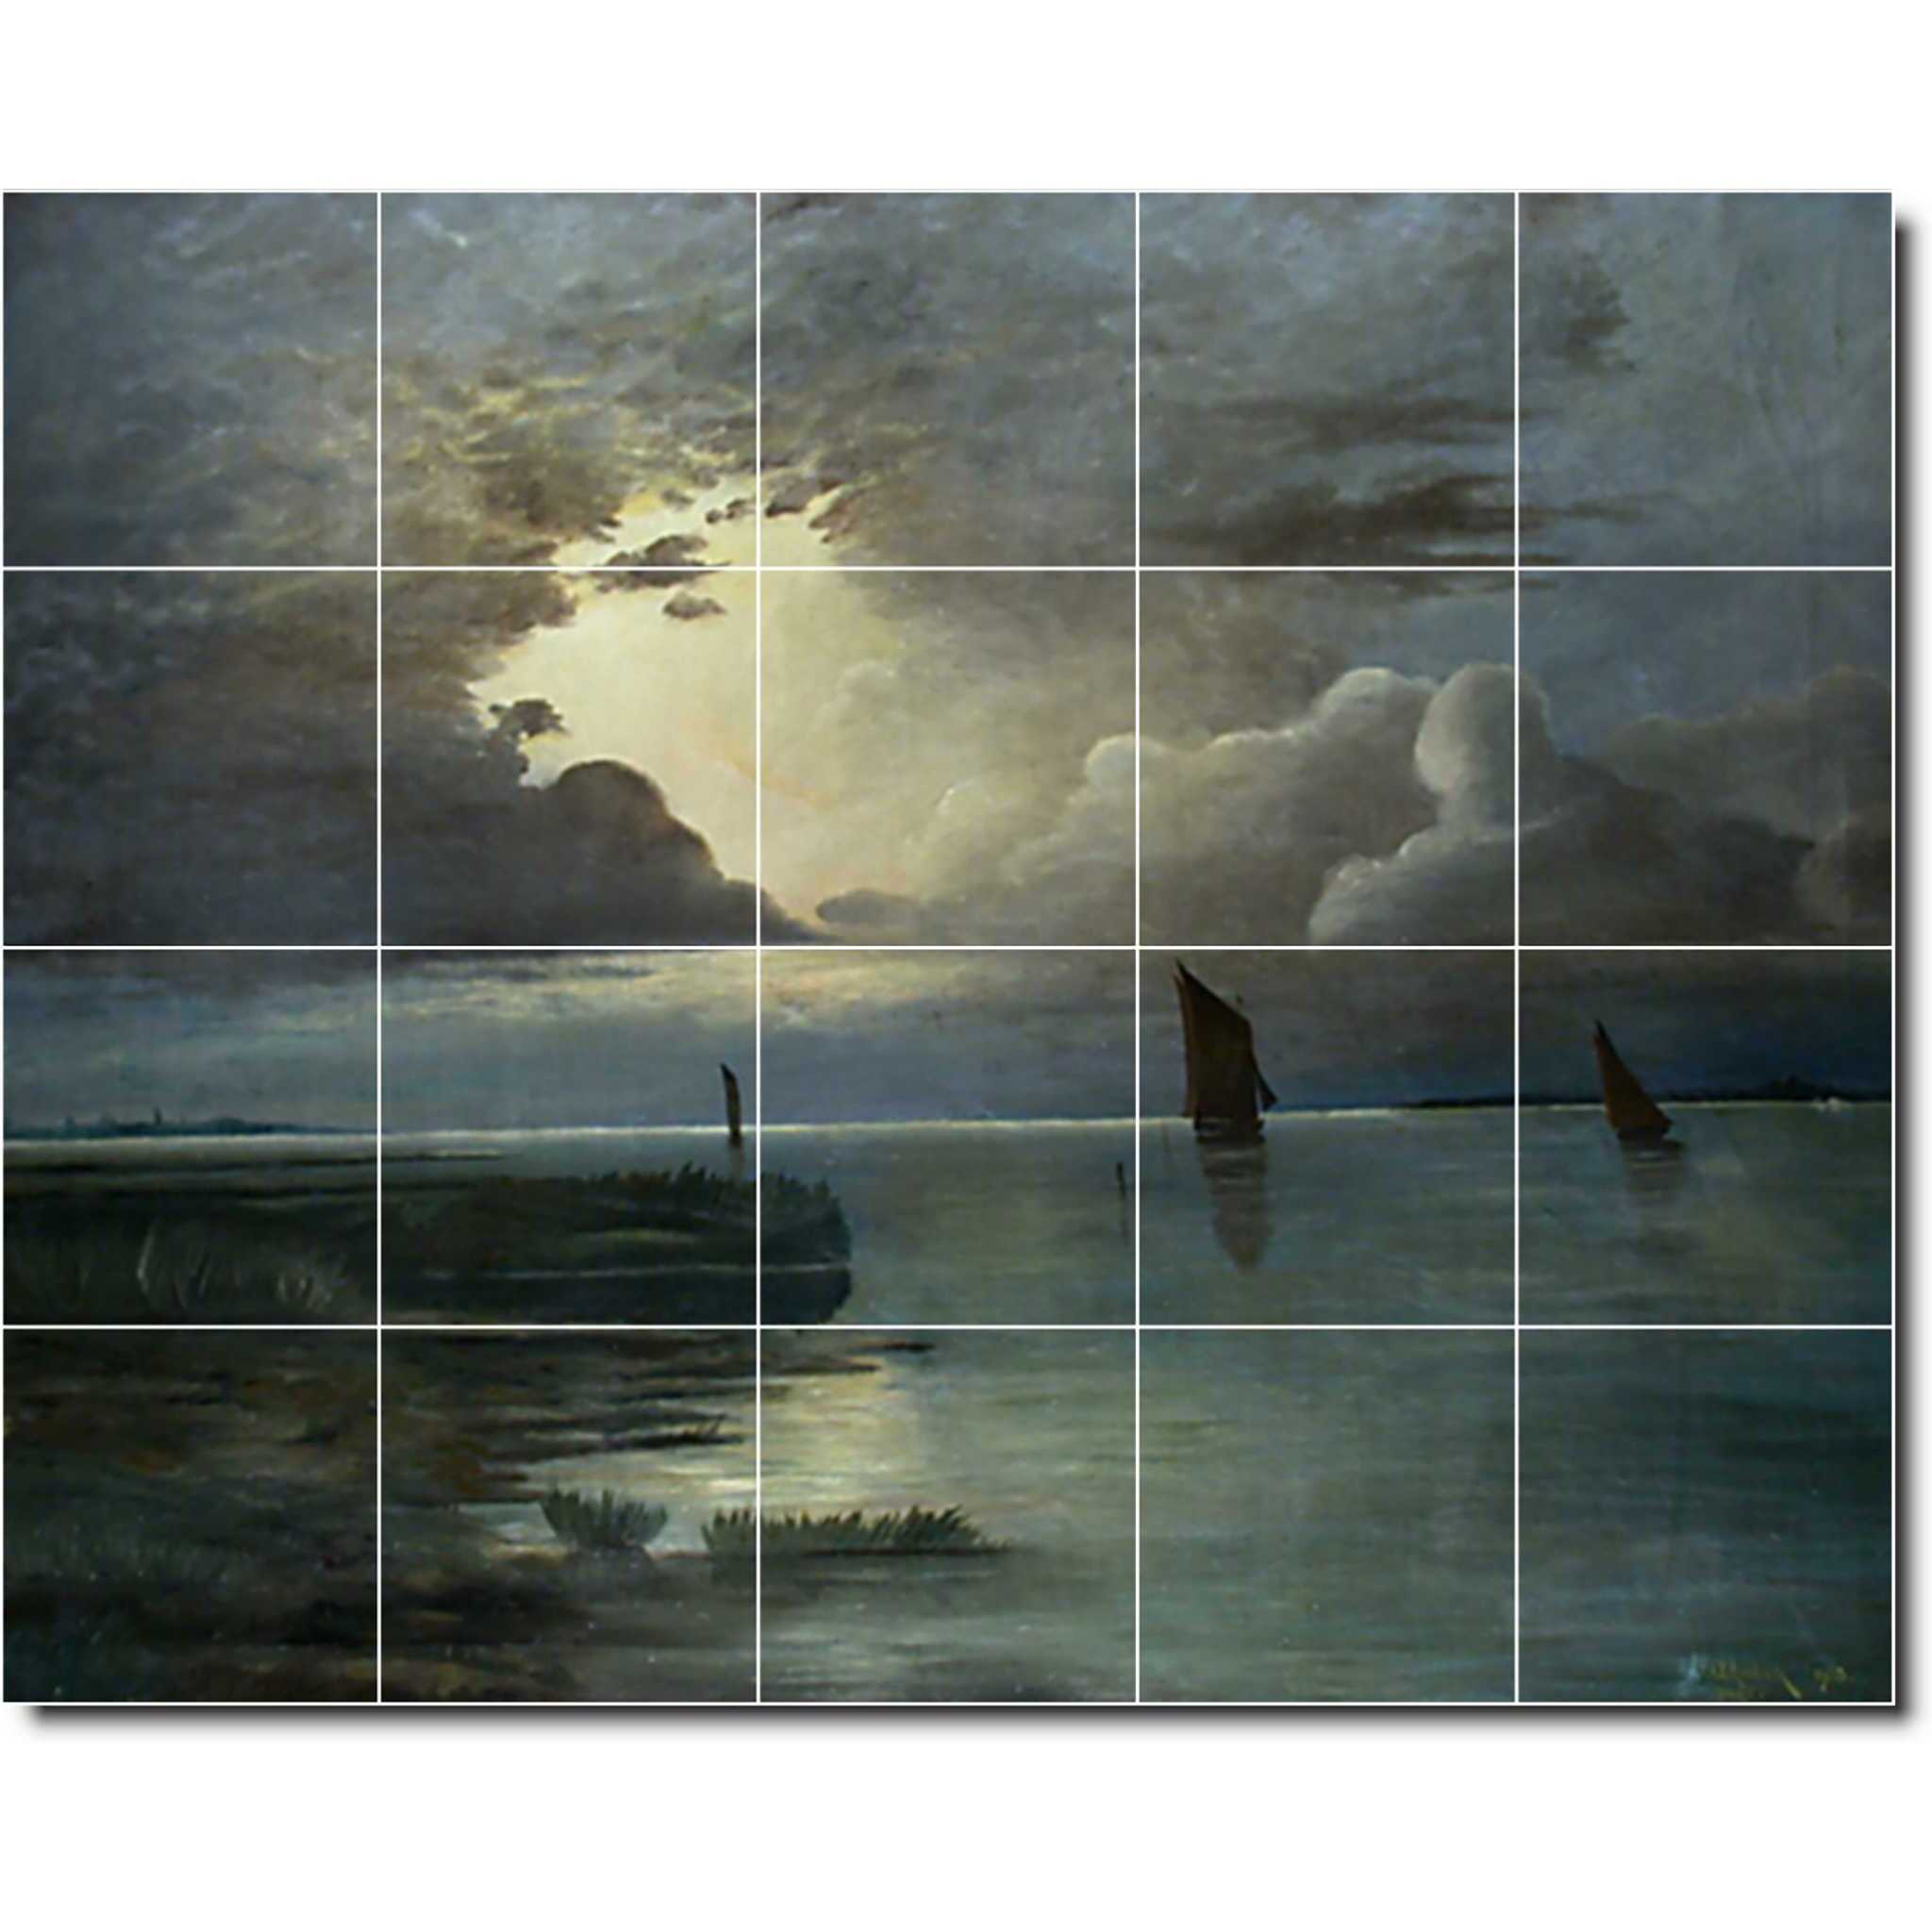 andreas achenbach waterfront painting ceramic tile mural p00021